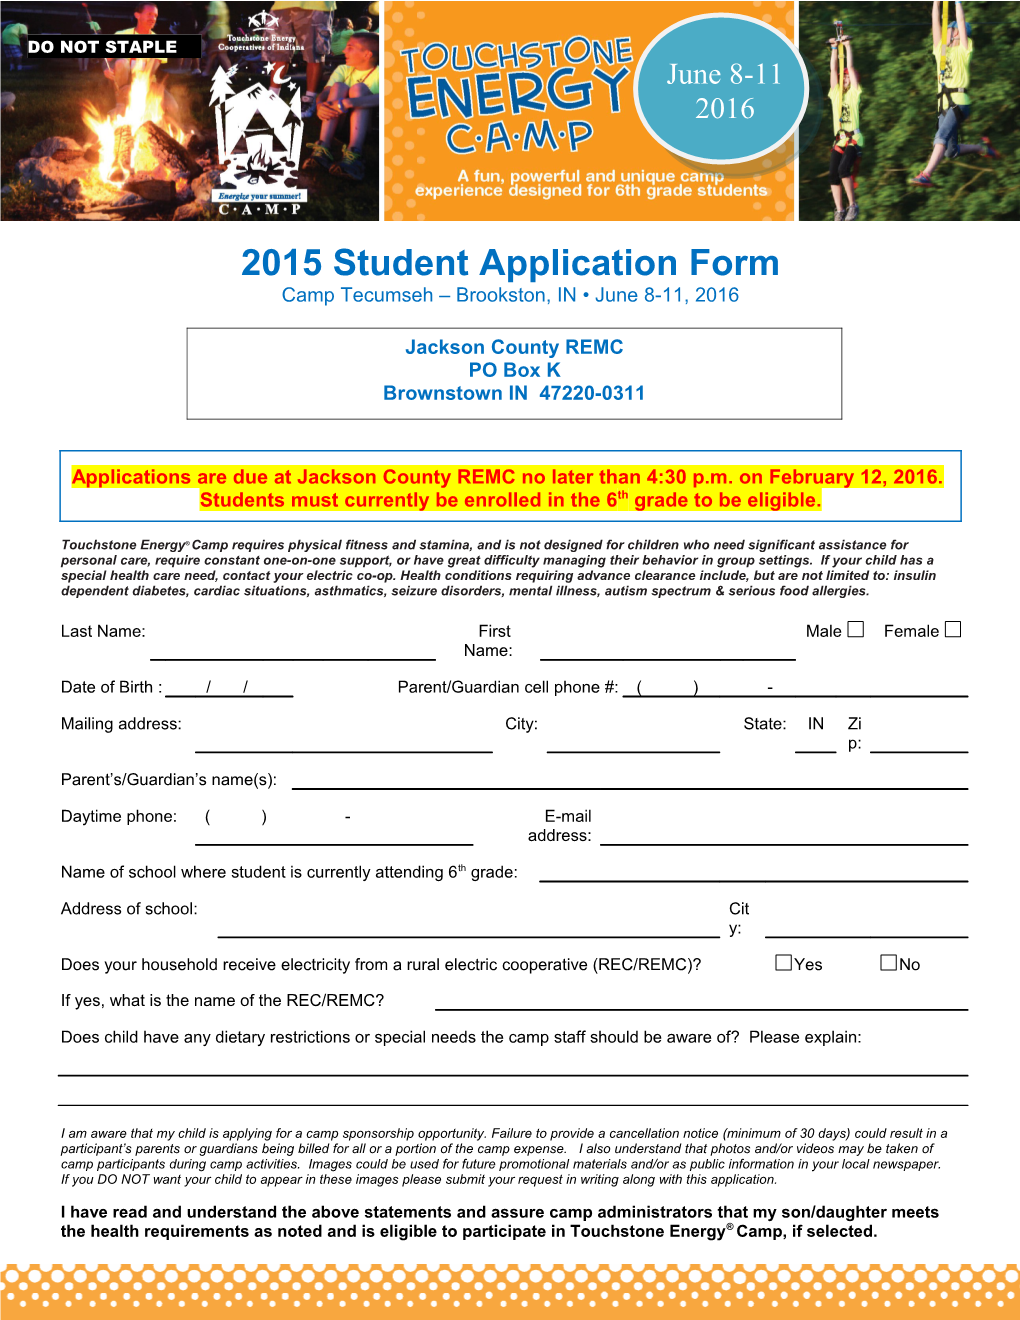 2015 Student Application Form